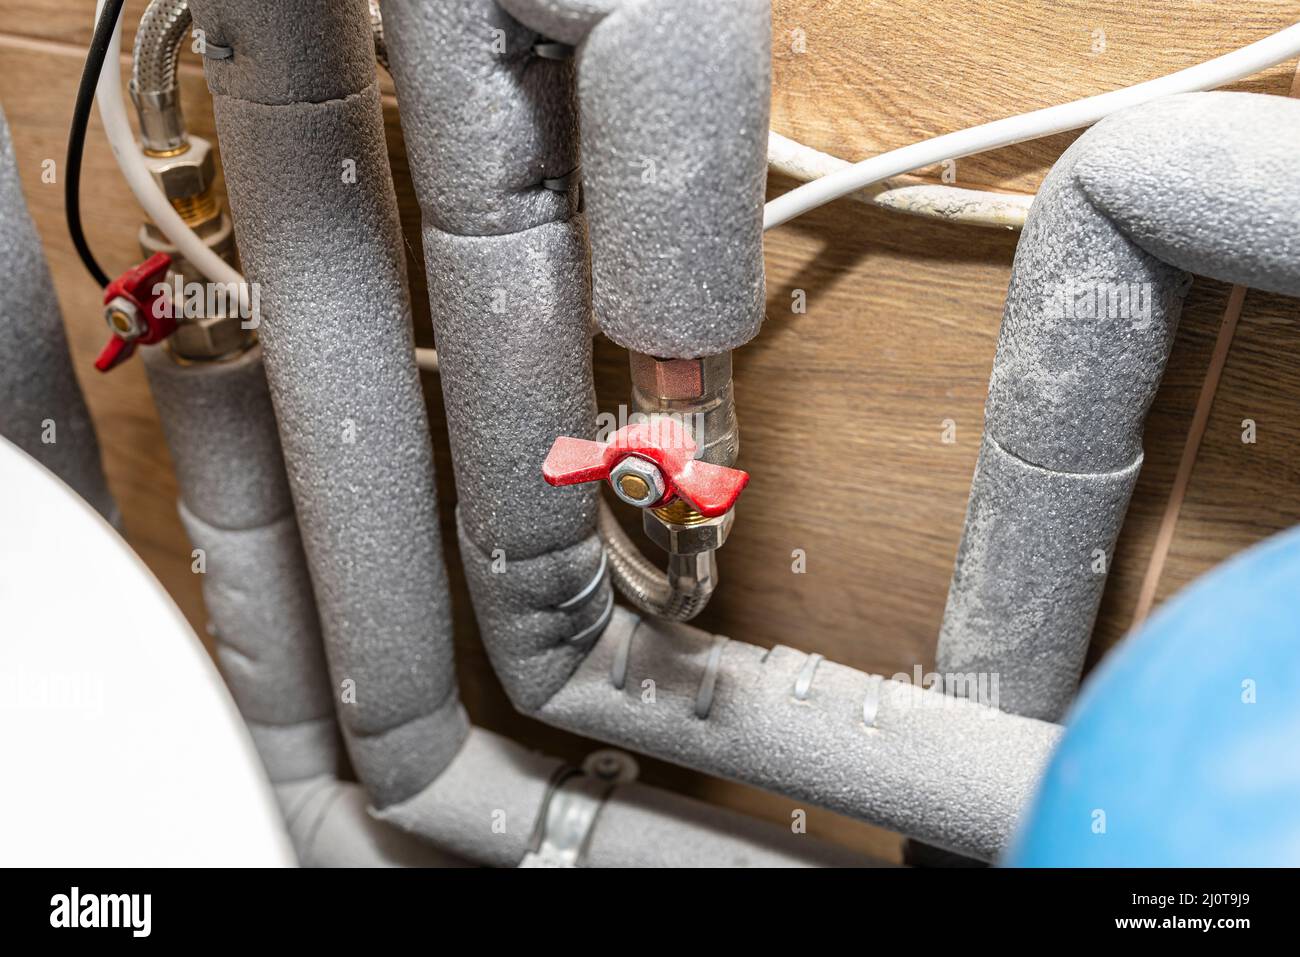 Closed water valves for equalizing the water pressure in a gas boiler in a modern home boiler room with ceramic tiles. Stock Photo